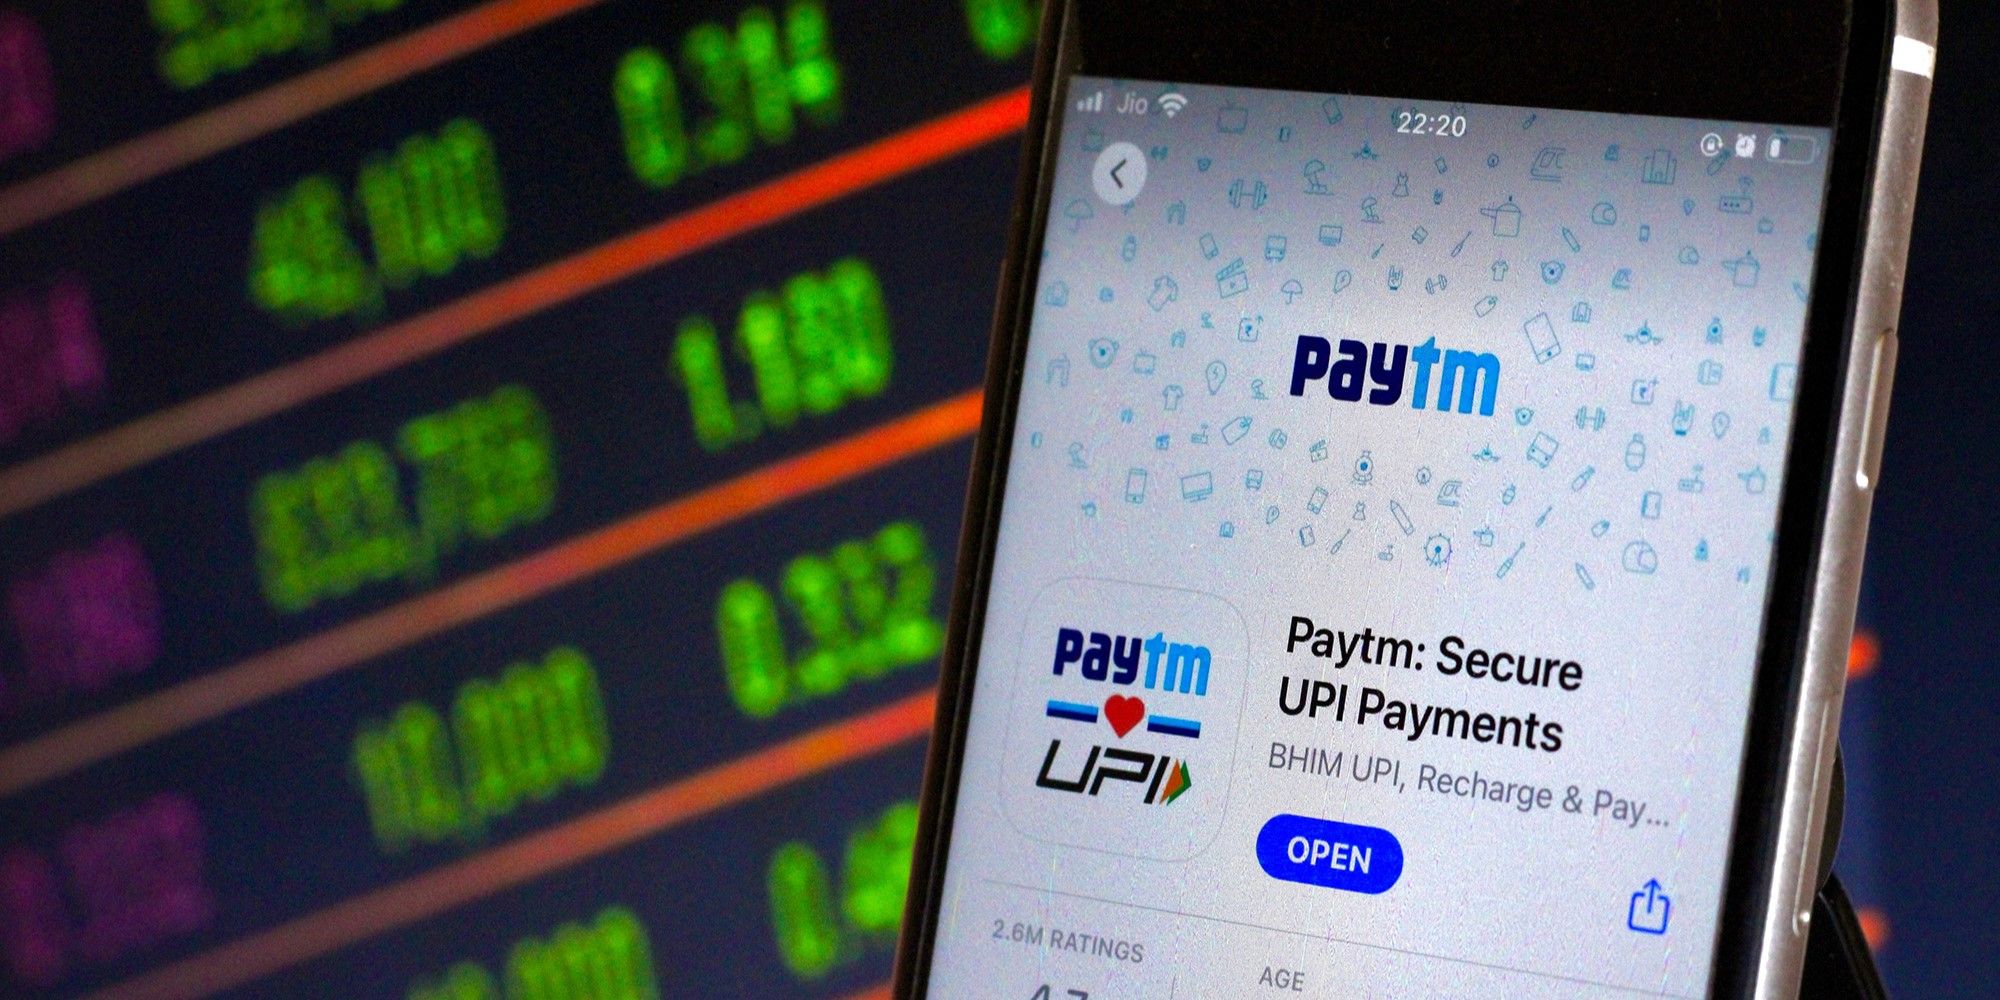 Paytm Payments Bank failed to put mechanism to detect, report suspicious transactions: FIU